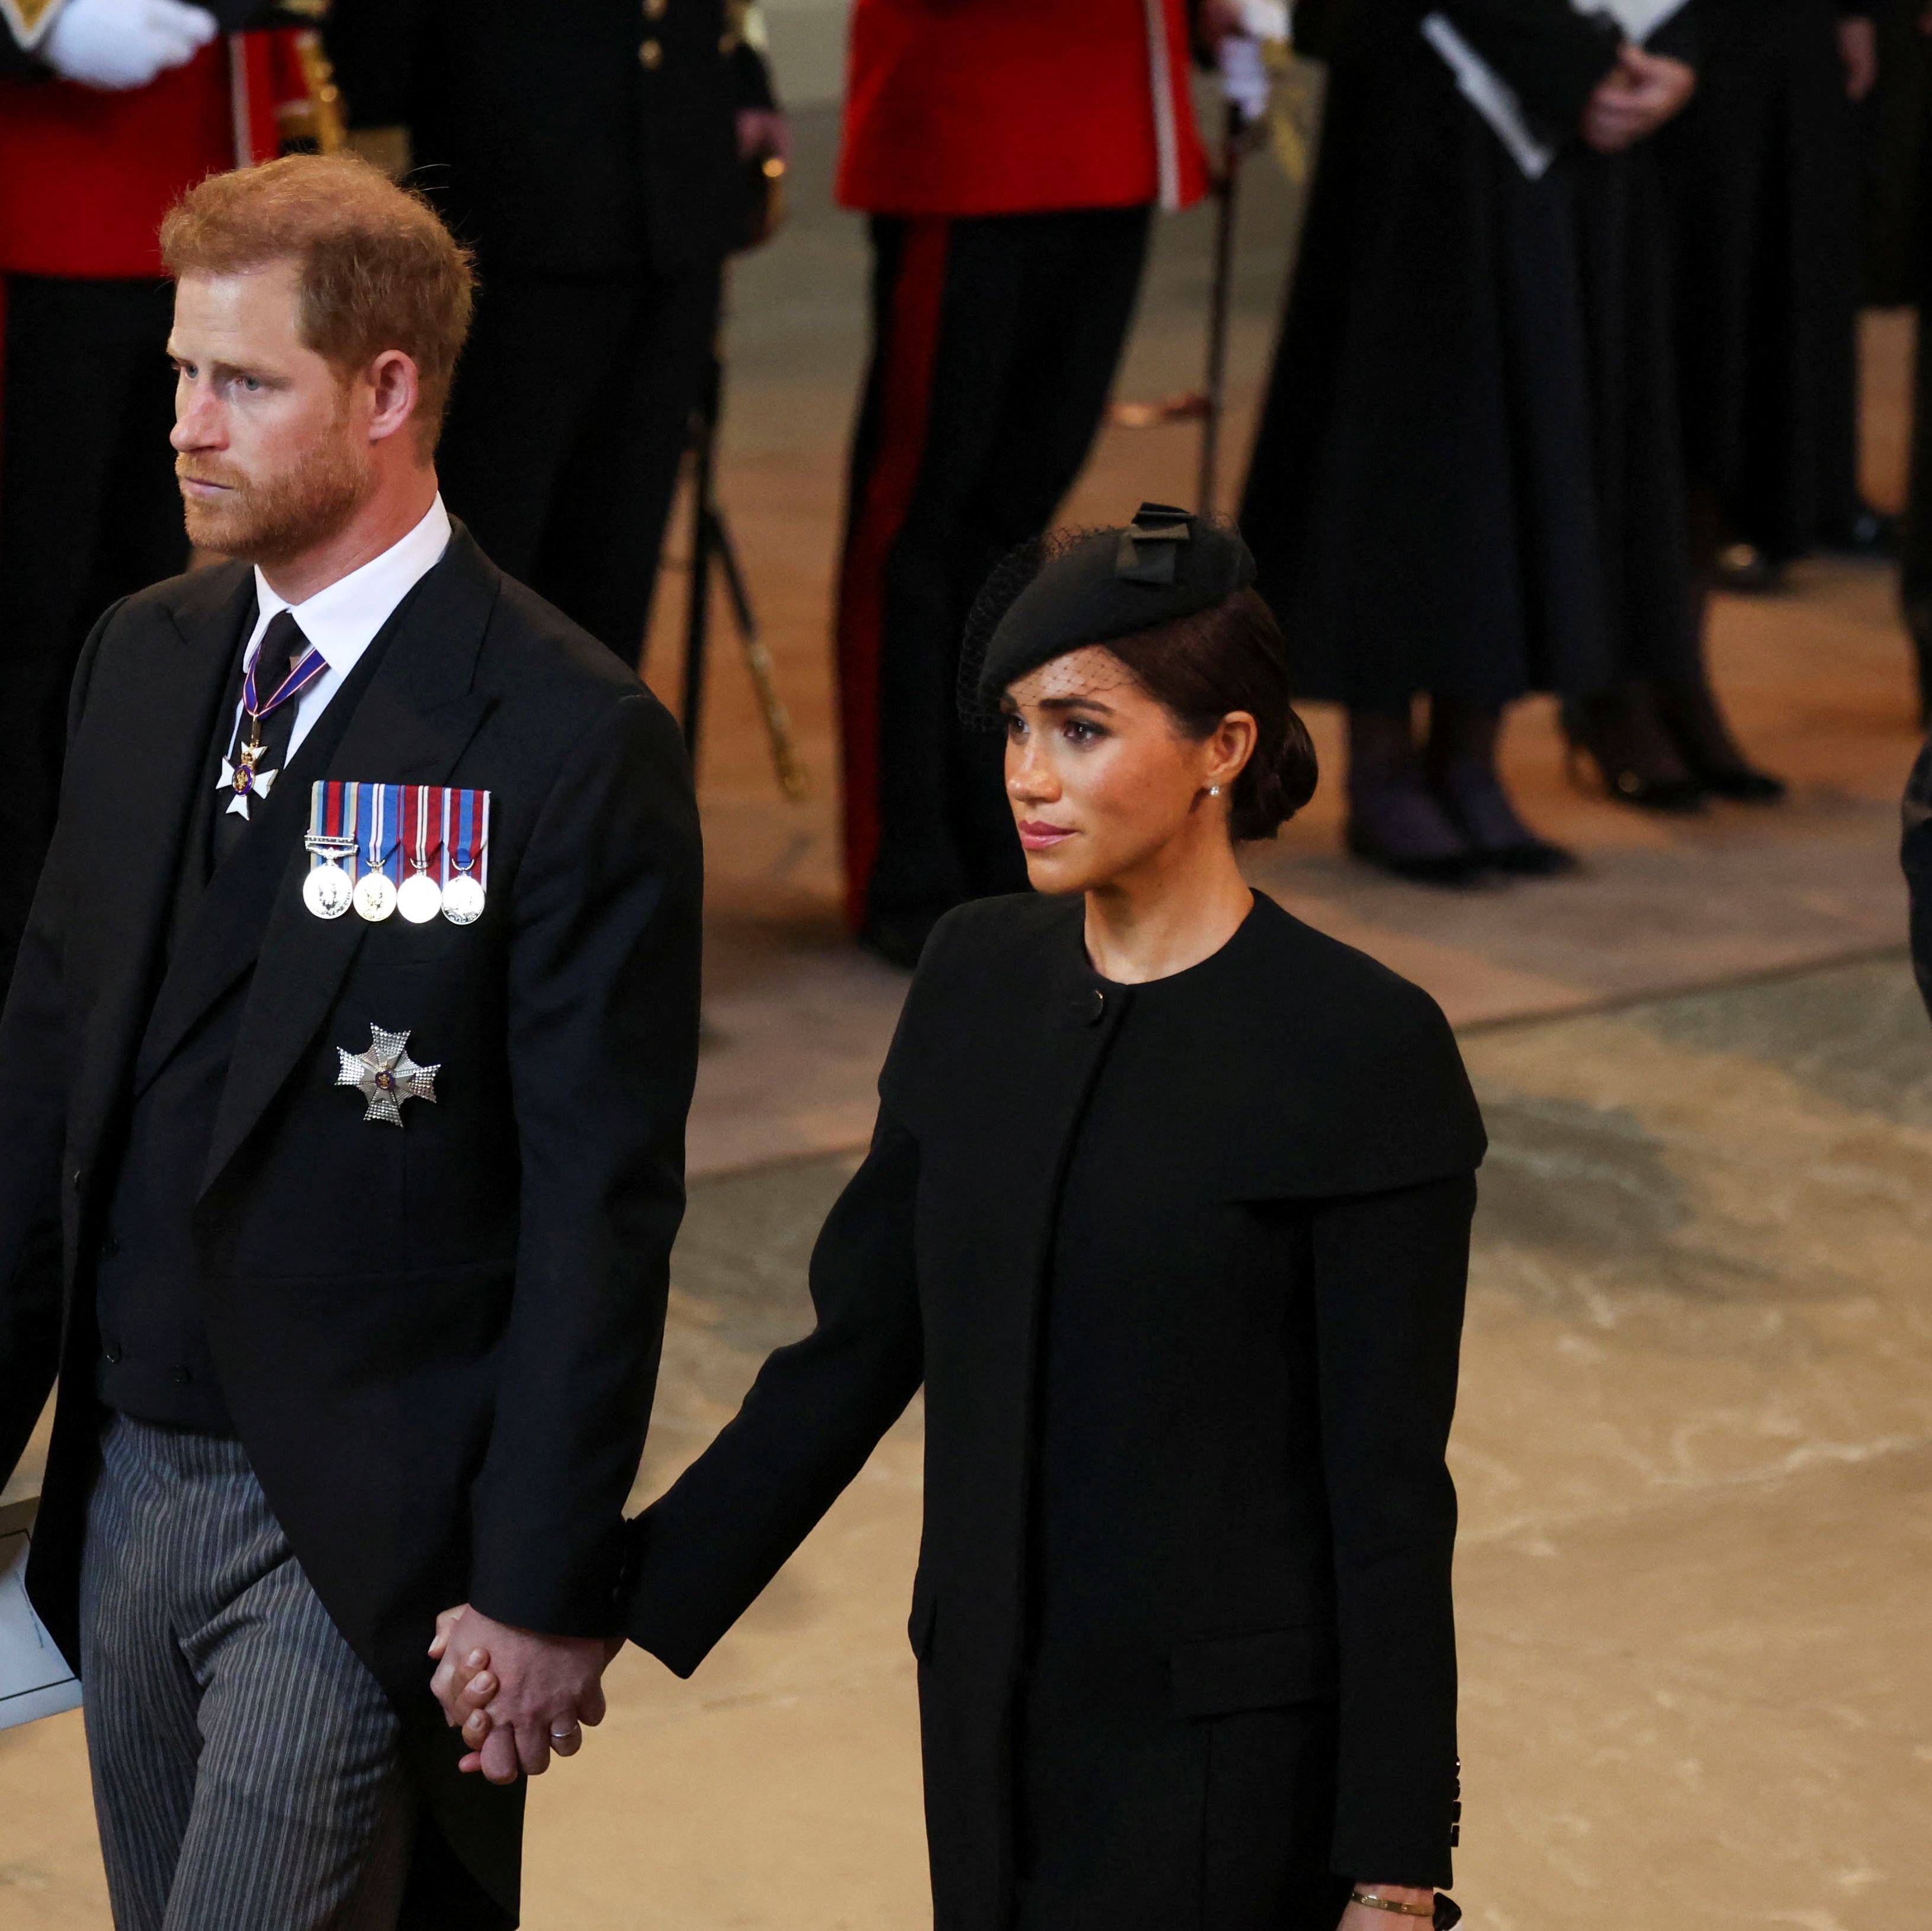 The couple's extended visit following the Queen's death has come to an end.